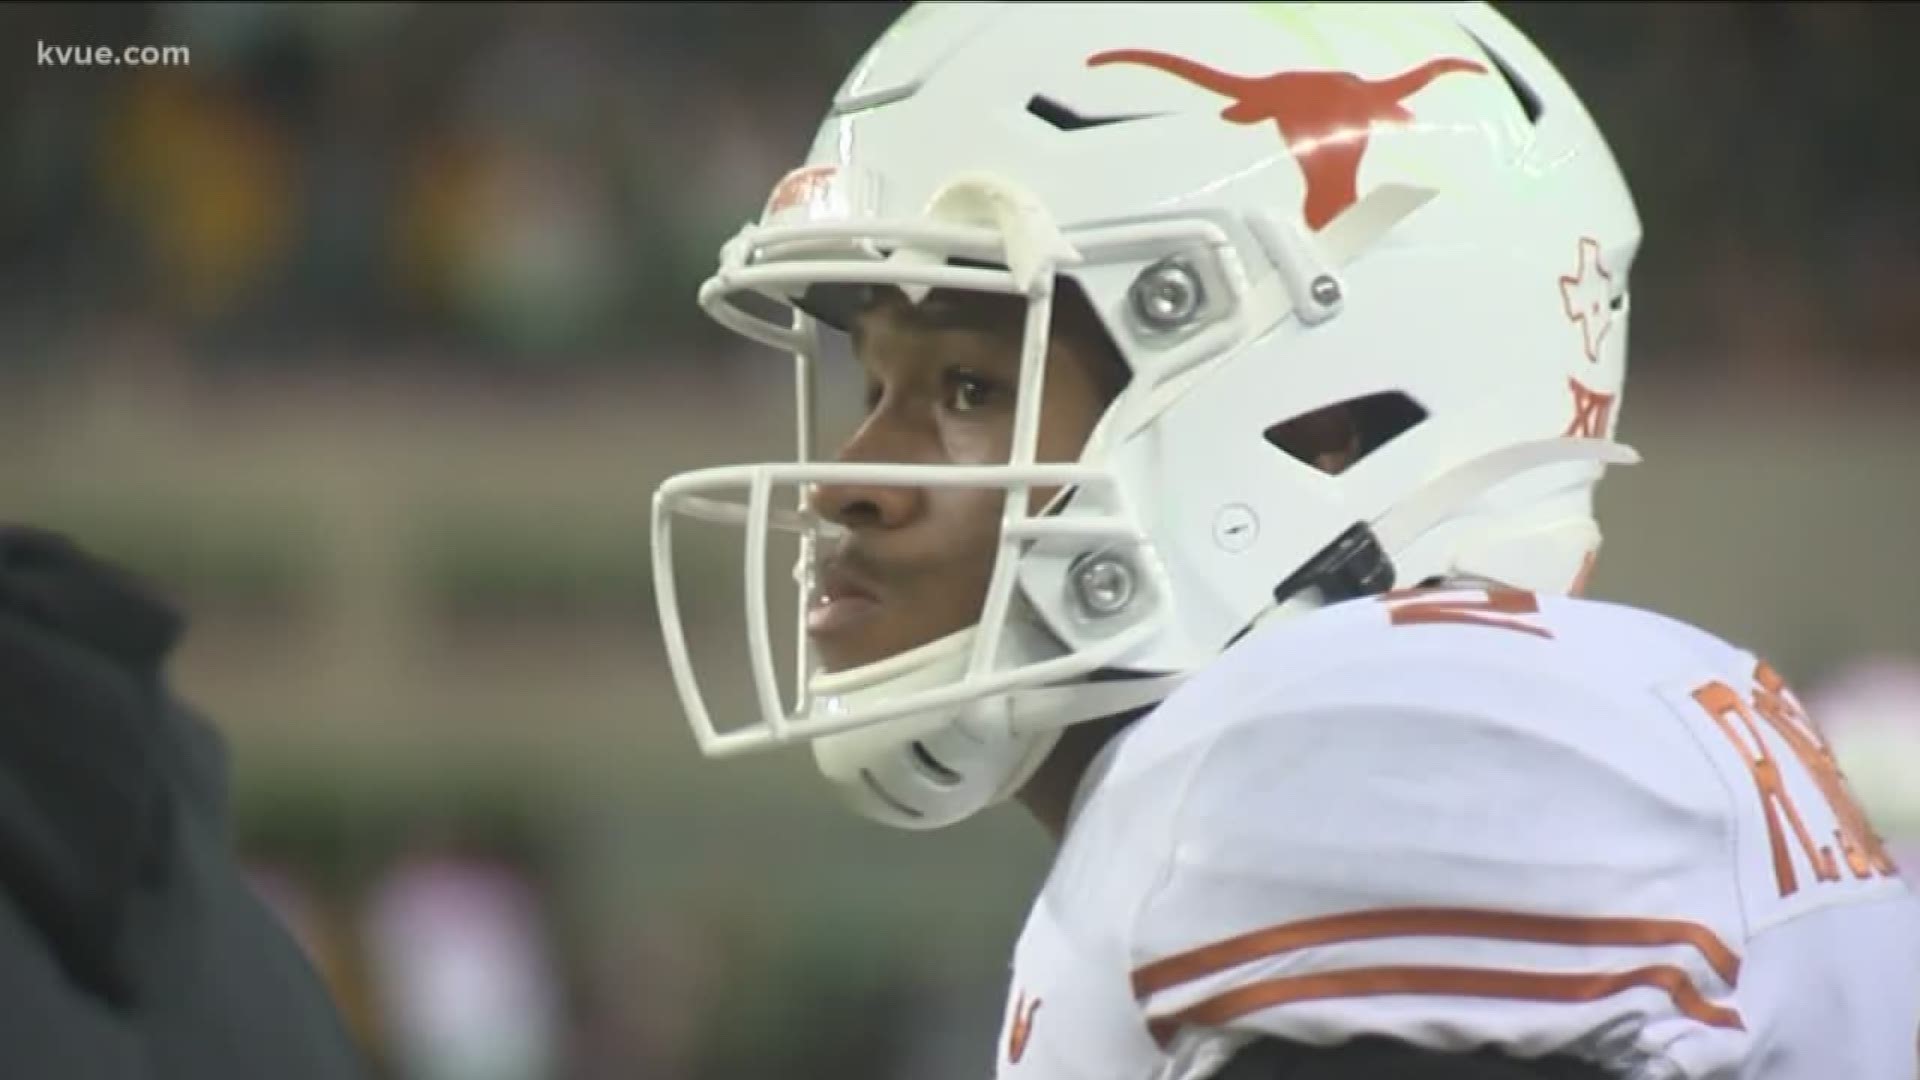 Earlier in the 2019 season, Texas' football team was pegged as a one with all offense and no defense, but over the past four games, that has been far from the case.